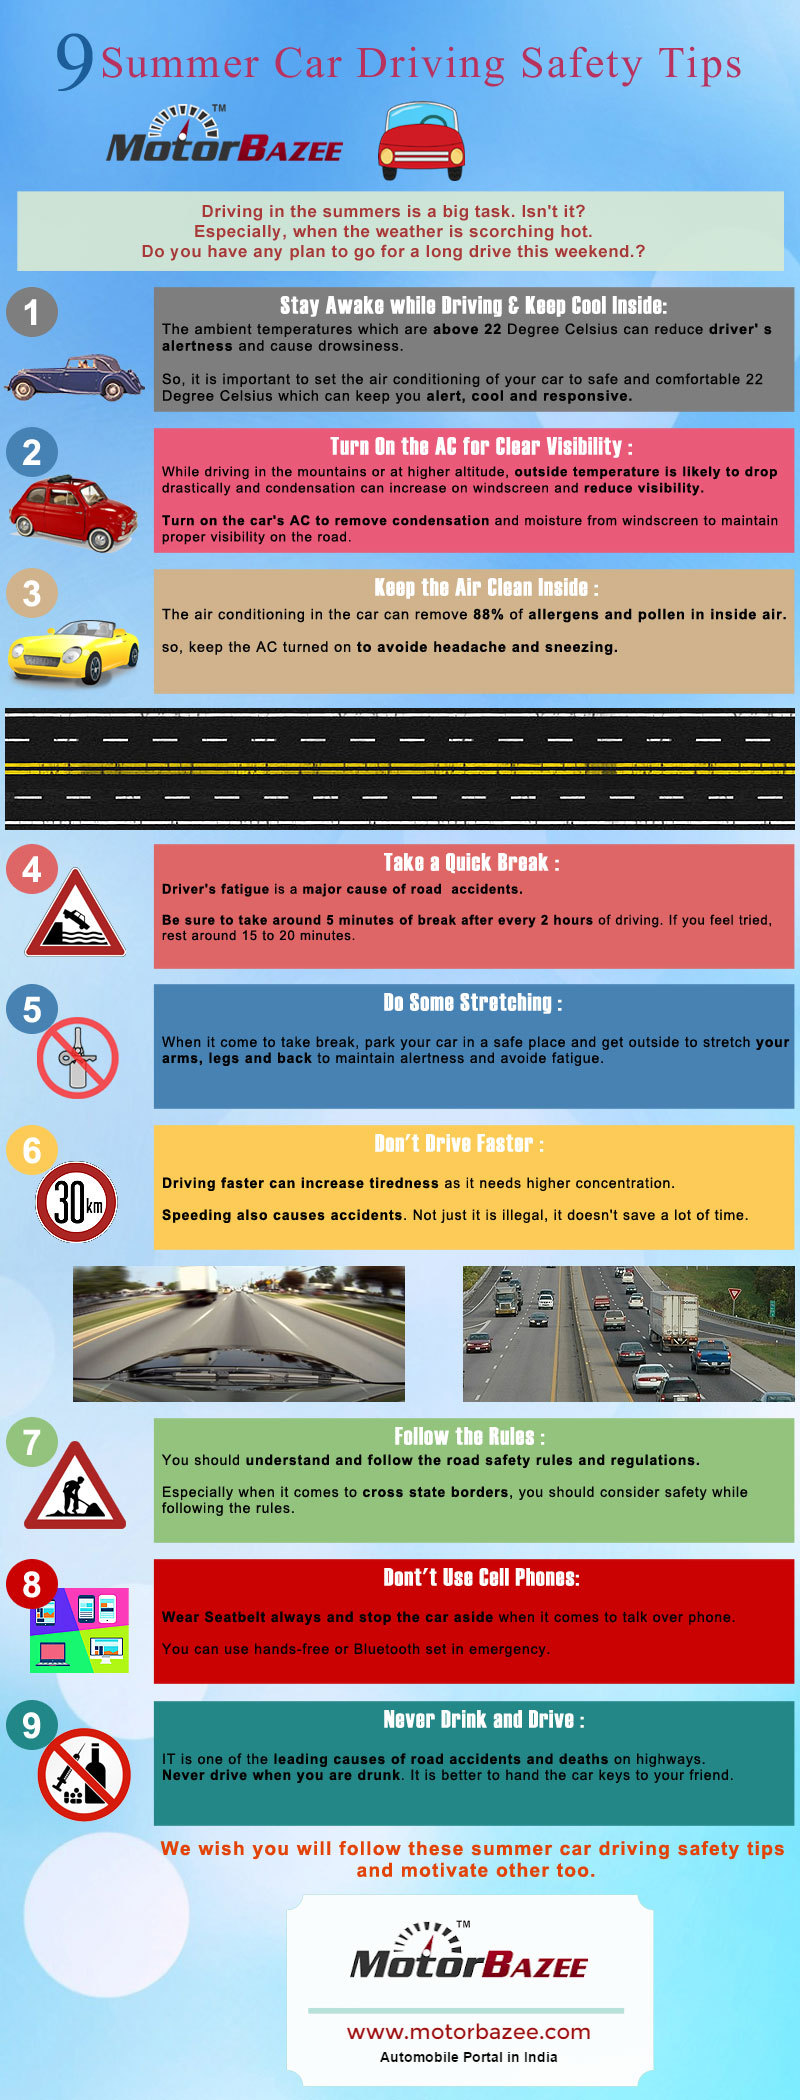 Summer-car-driving-tips-infographic